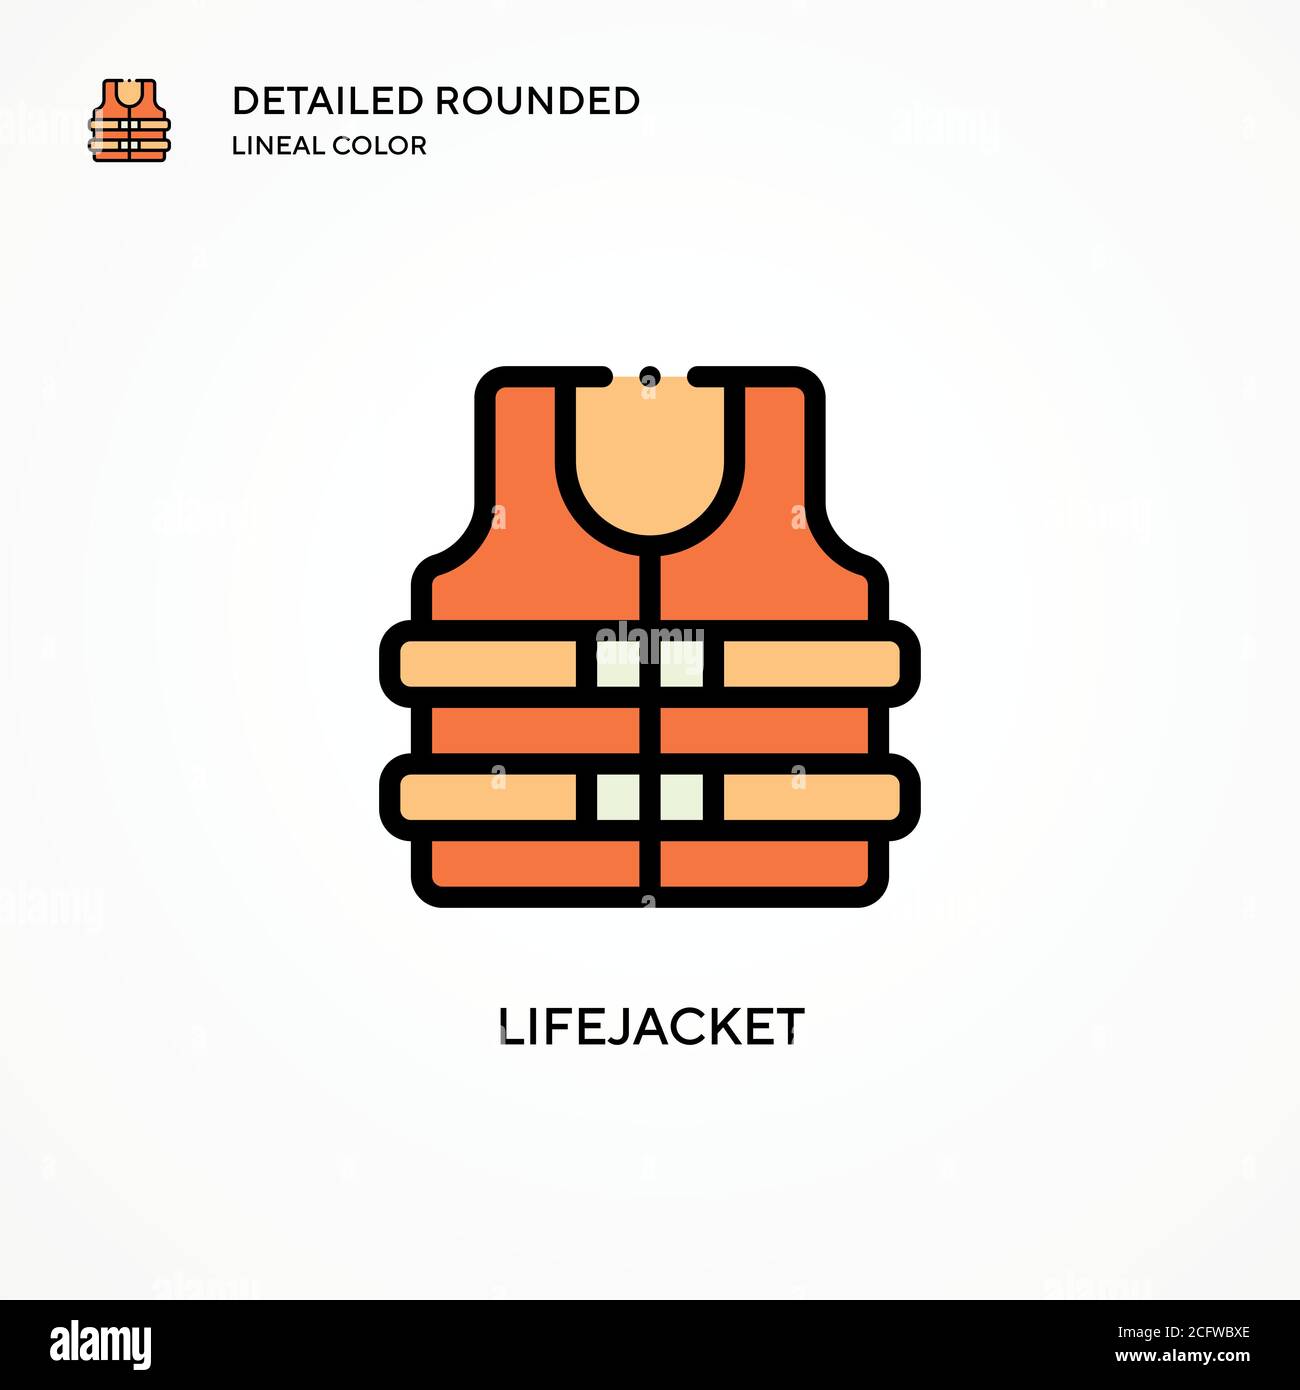 Lifejacket vector icon. Modern vector illustration concepts. Easy to edit and customize. Stock Vector